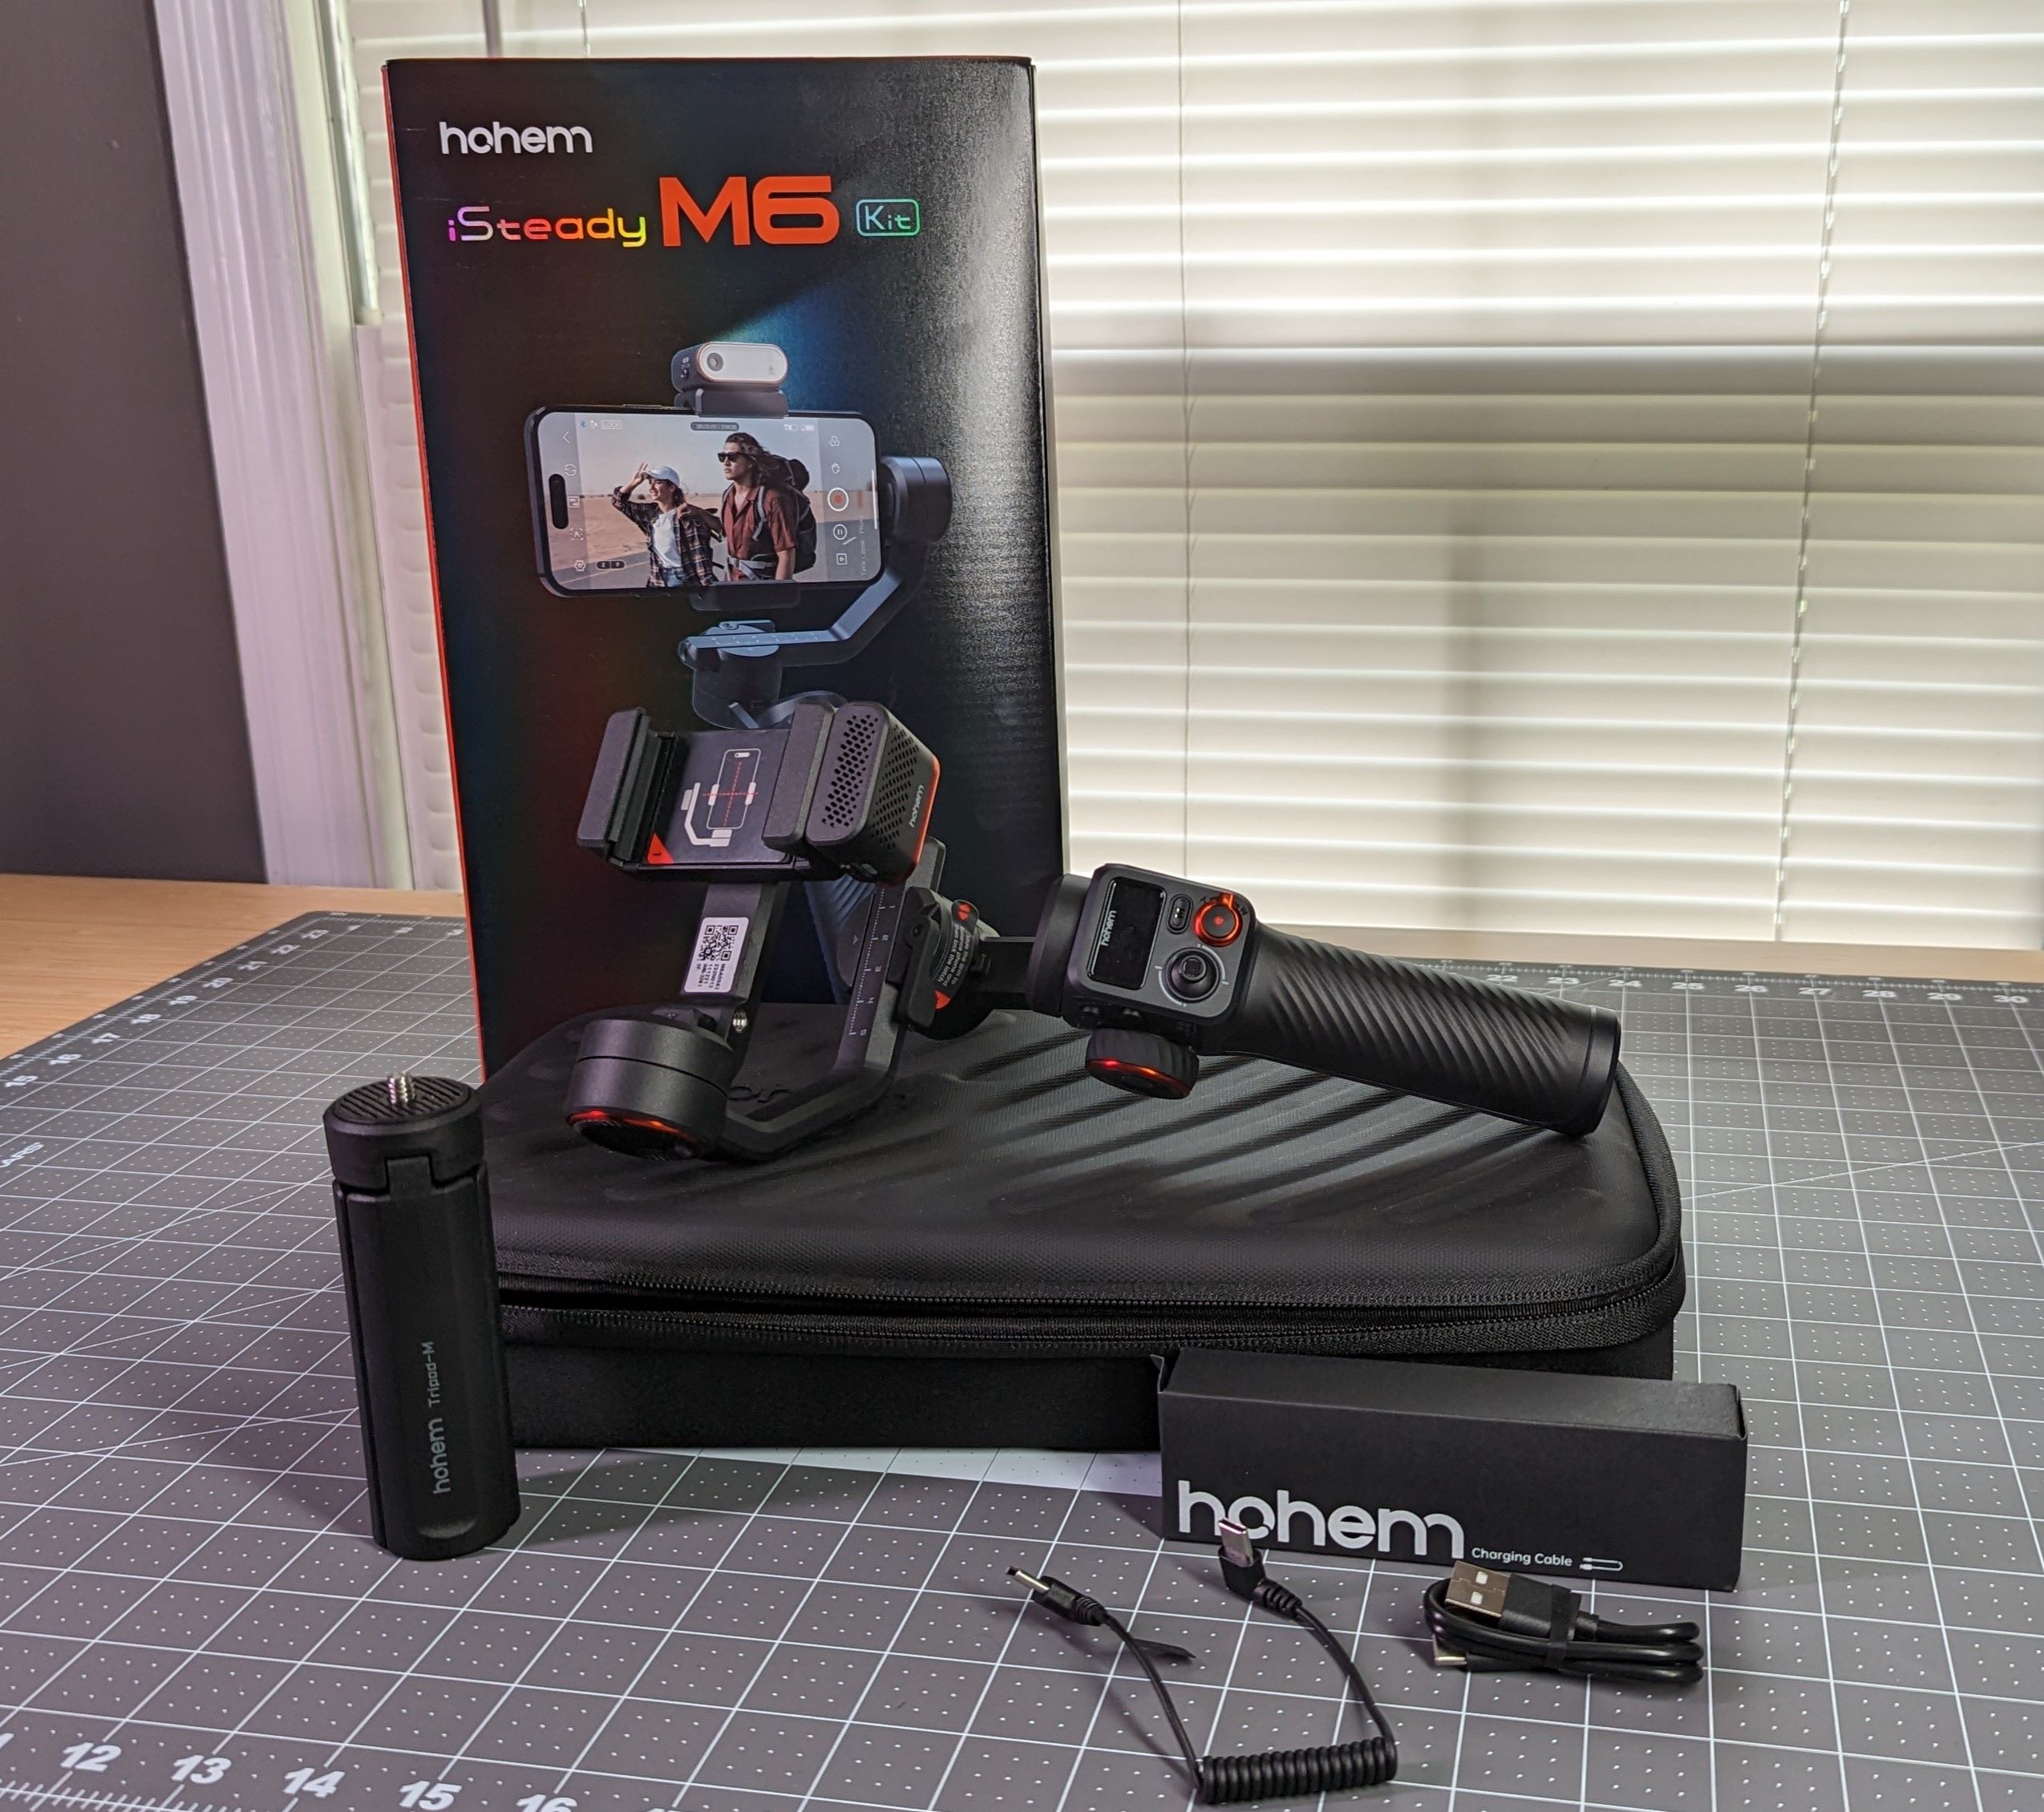 hohem iSteady M6 Kit 3- Smartphone Gimbal Stabilizer with AI Vision Sensor  & with Tripod, Magnetic Design, Portable and Foldable for video recording 